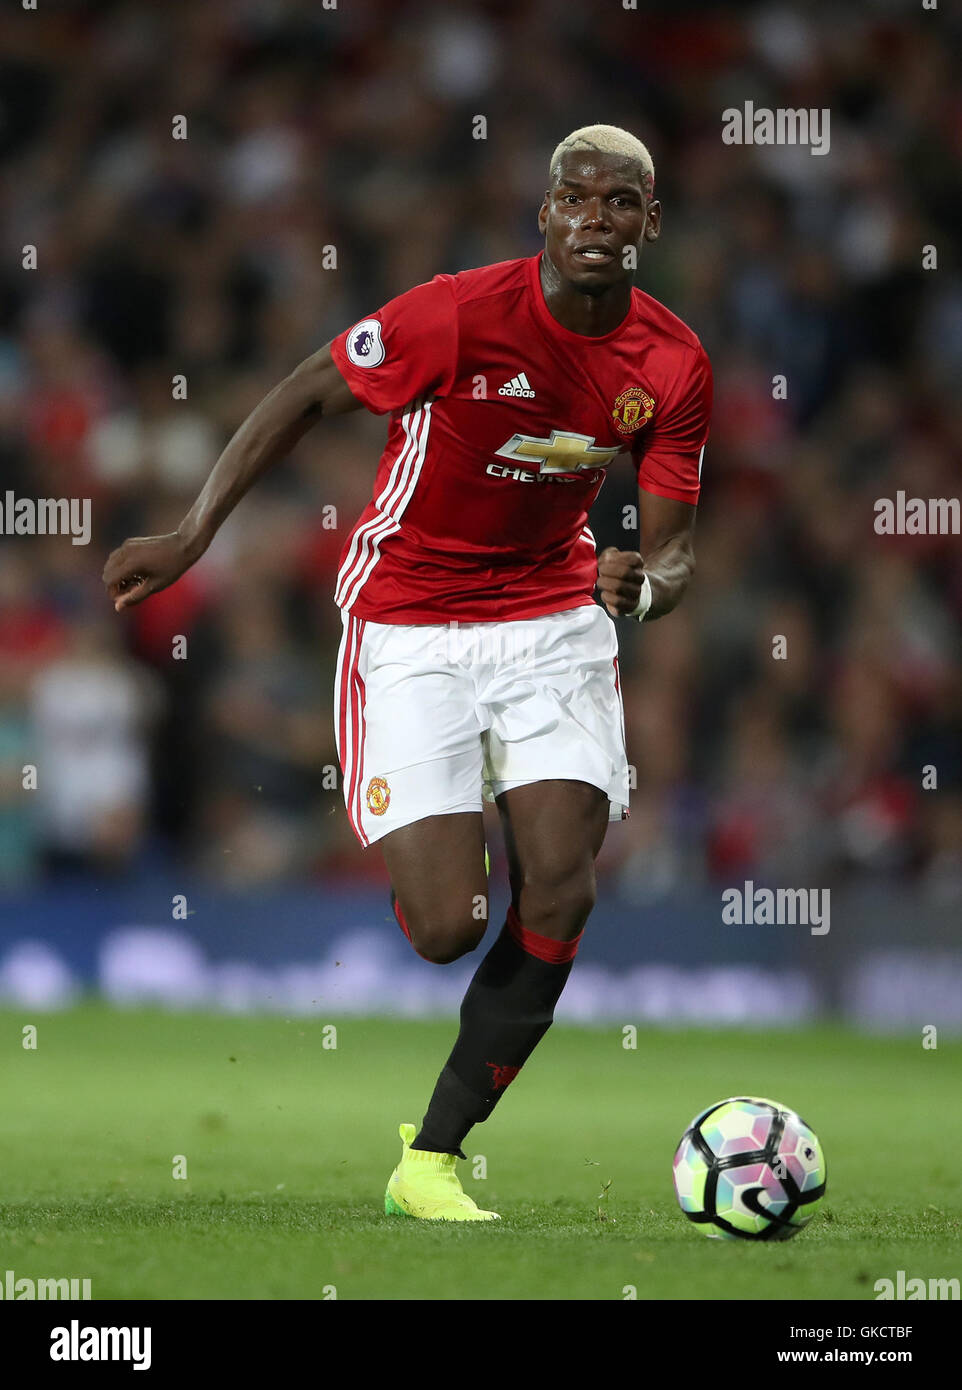 Manchester United's Paul Pogba during the Premier League match at Old Trafford, Manchester. PRESS ASSOCIATION Photo. Picture date: Friday August 19, 2016. See PA story SOCCER Man Utd. Photo credit should read: Nick Potts/PA Wire. RESTRICTIONS: No use with unauthorised audio, video, data, fixture lists, club/league logos or 'live' services. Online in-match use limited to 75 images, no video emulation. No use in betting, games or single club/league/player publications. Stock Photo